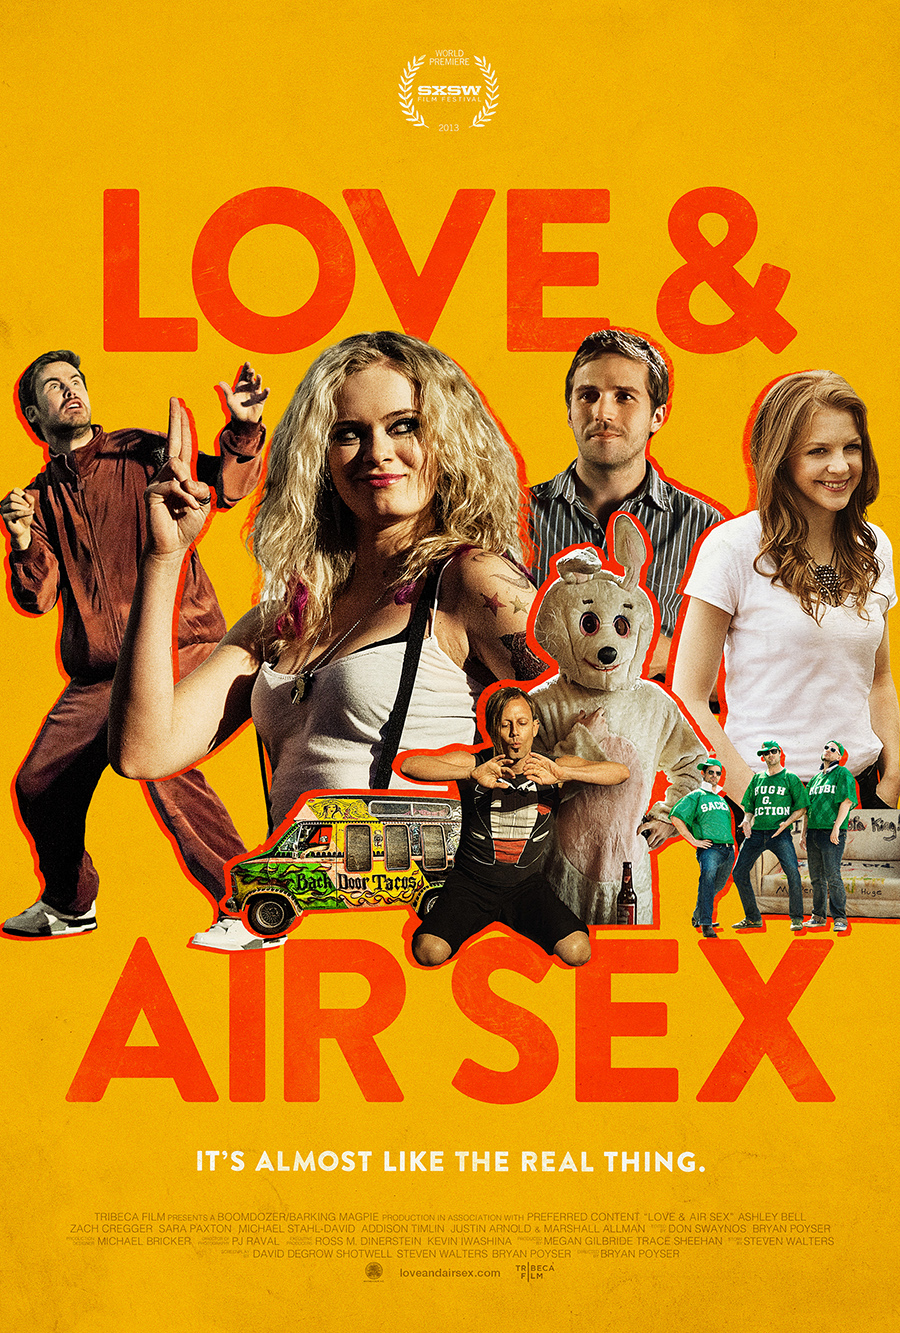 Ashley Bell, Sara Paxton, Zach Cregger, Michael Stahl-David, and Justin Arnold in Love & Air Sex (2013)